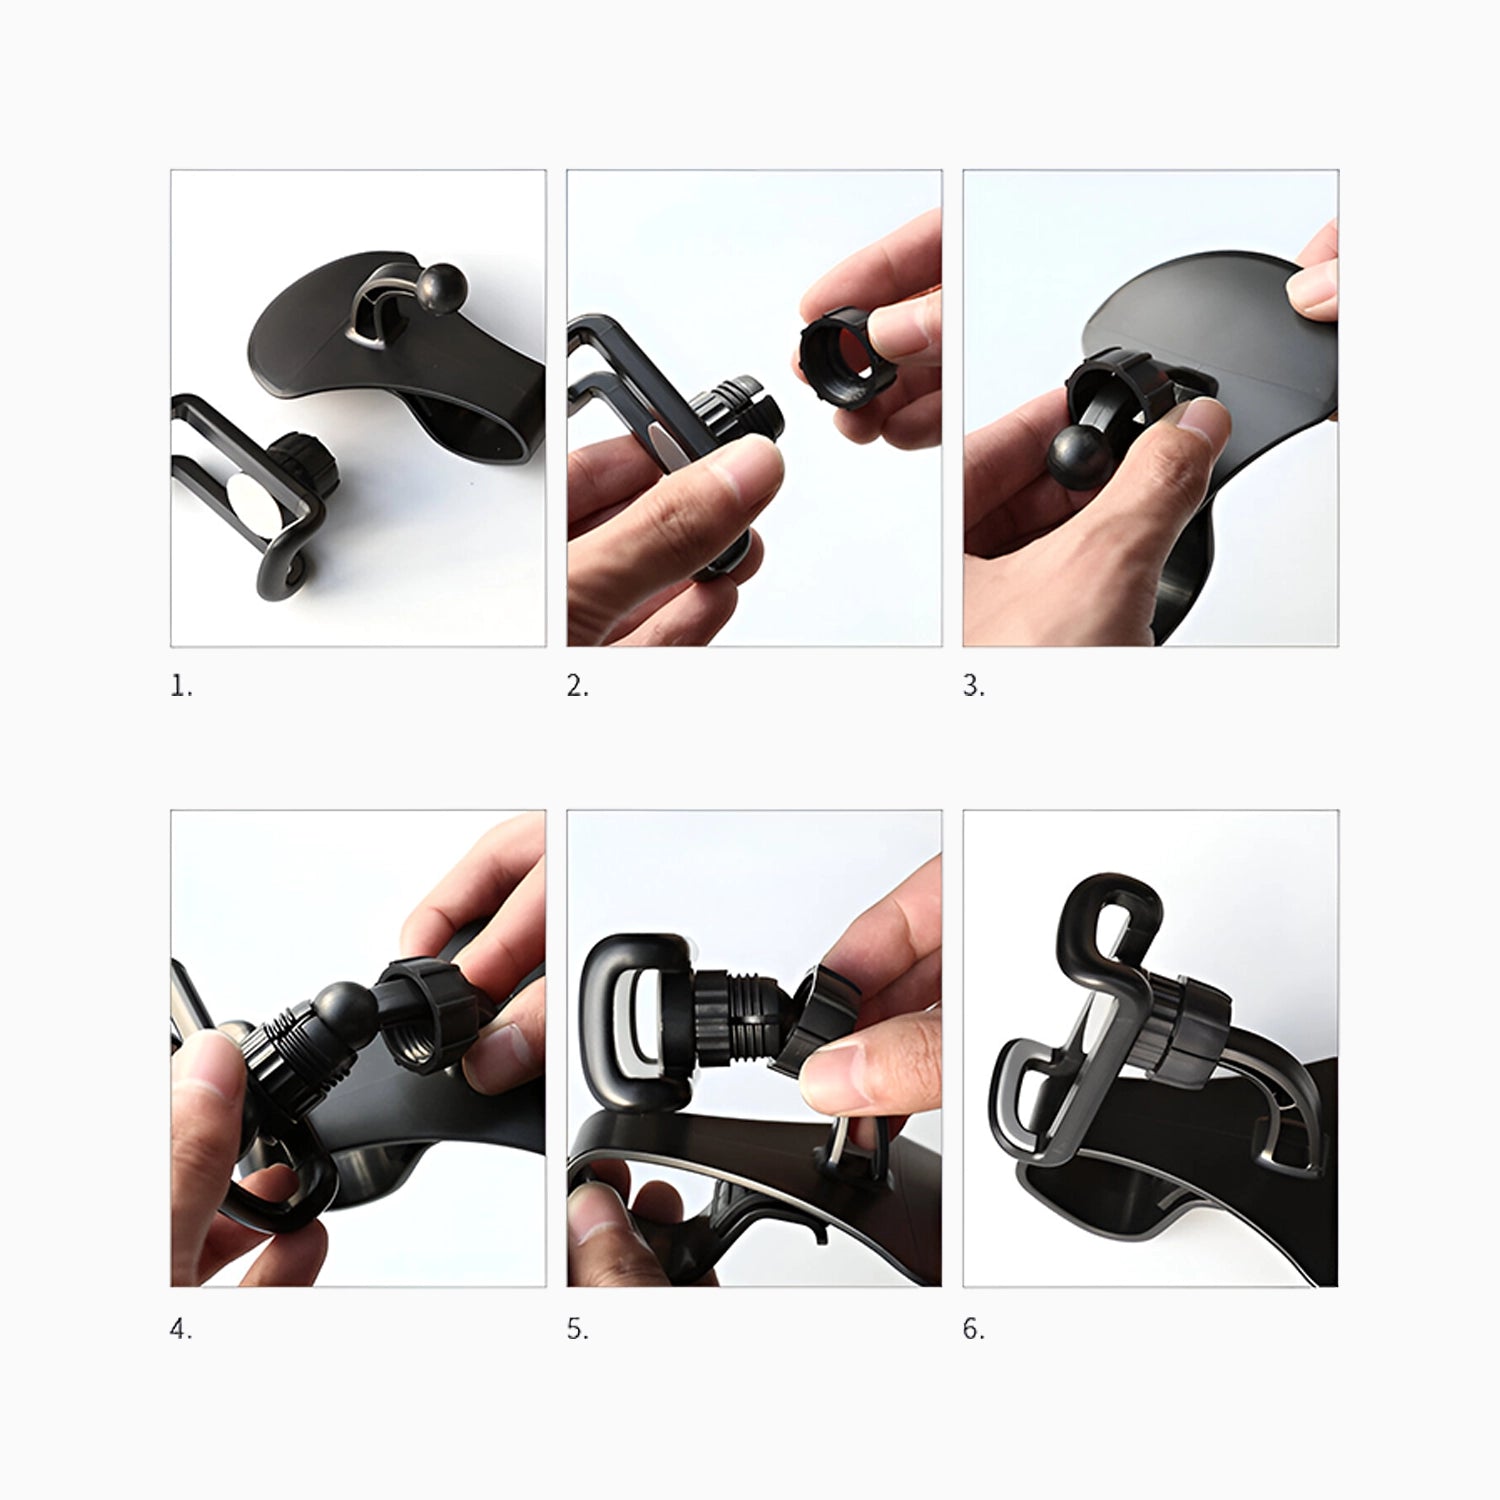 Step-by-step instruction images showing the assembly of a car dashboard mount, from parts to completed setup